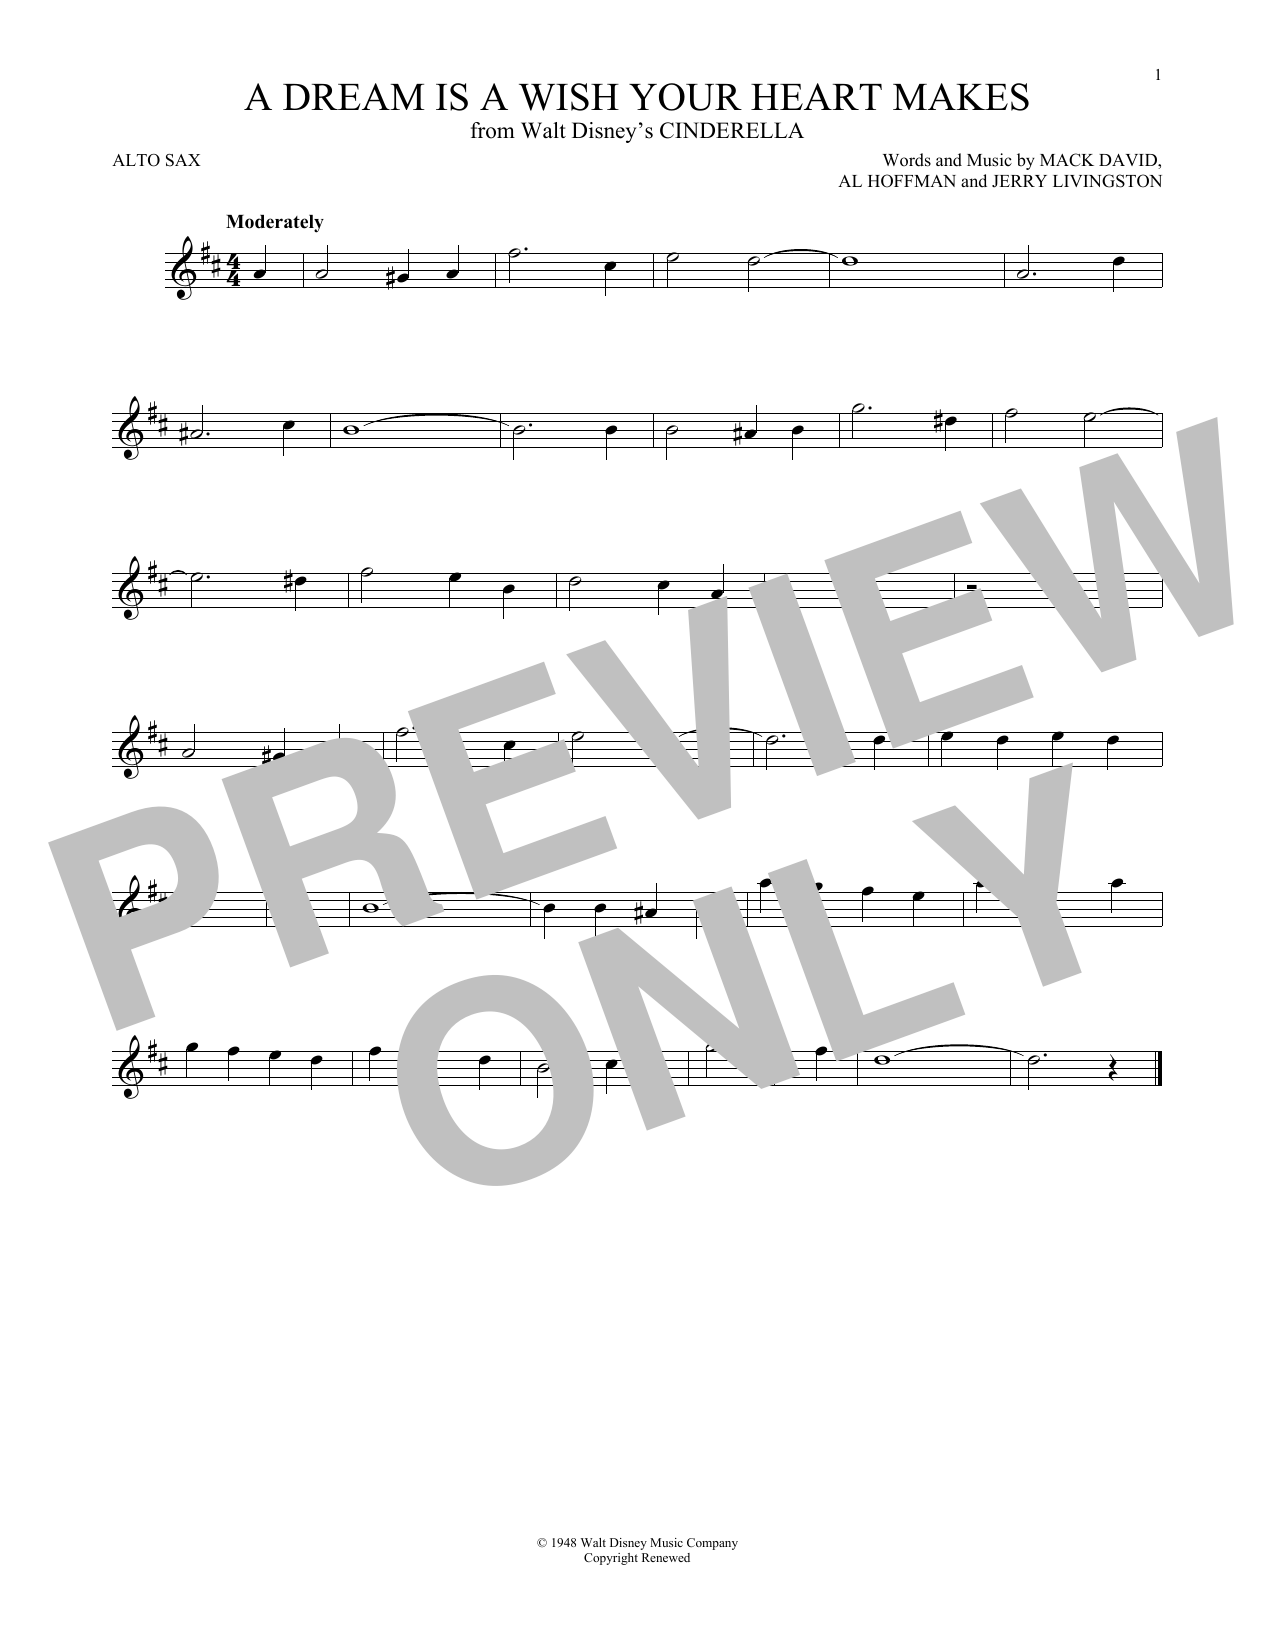 Mack David Al Hoffman And Jerry Livingston A Dream Is A Wish Your Heart Makes Sheet Music Notes Download Printable Pdf Score